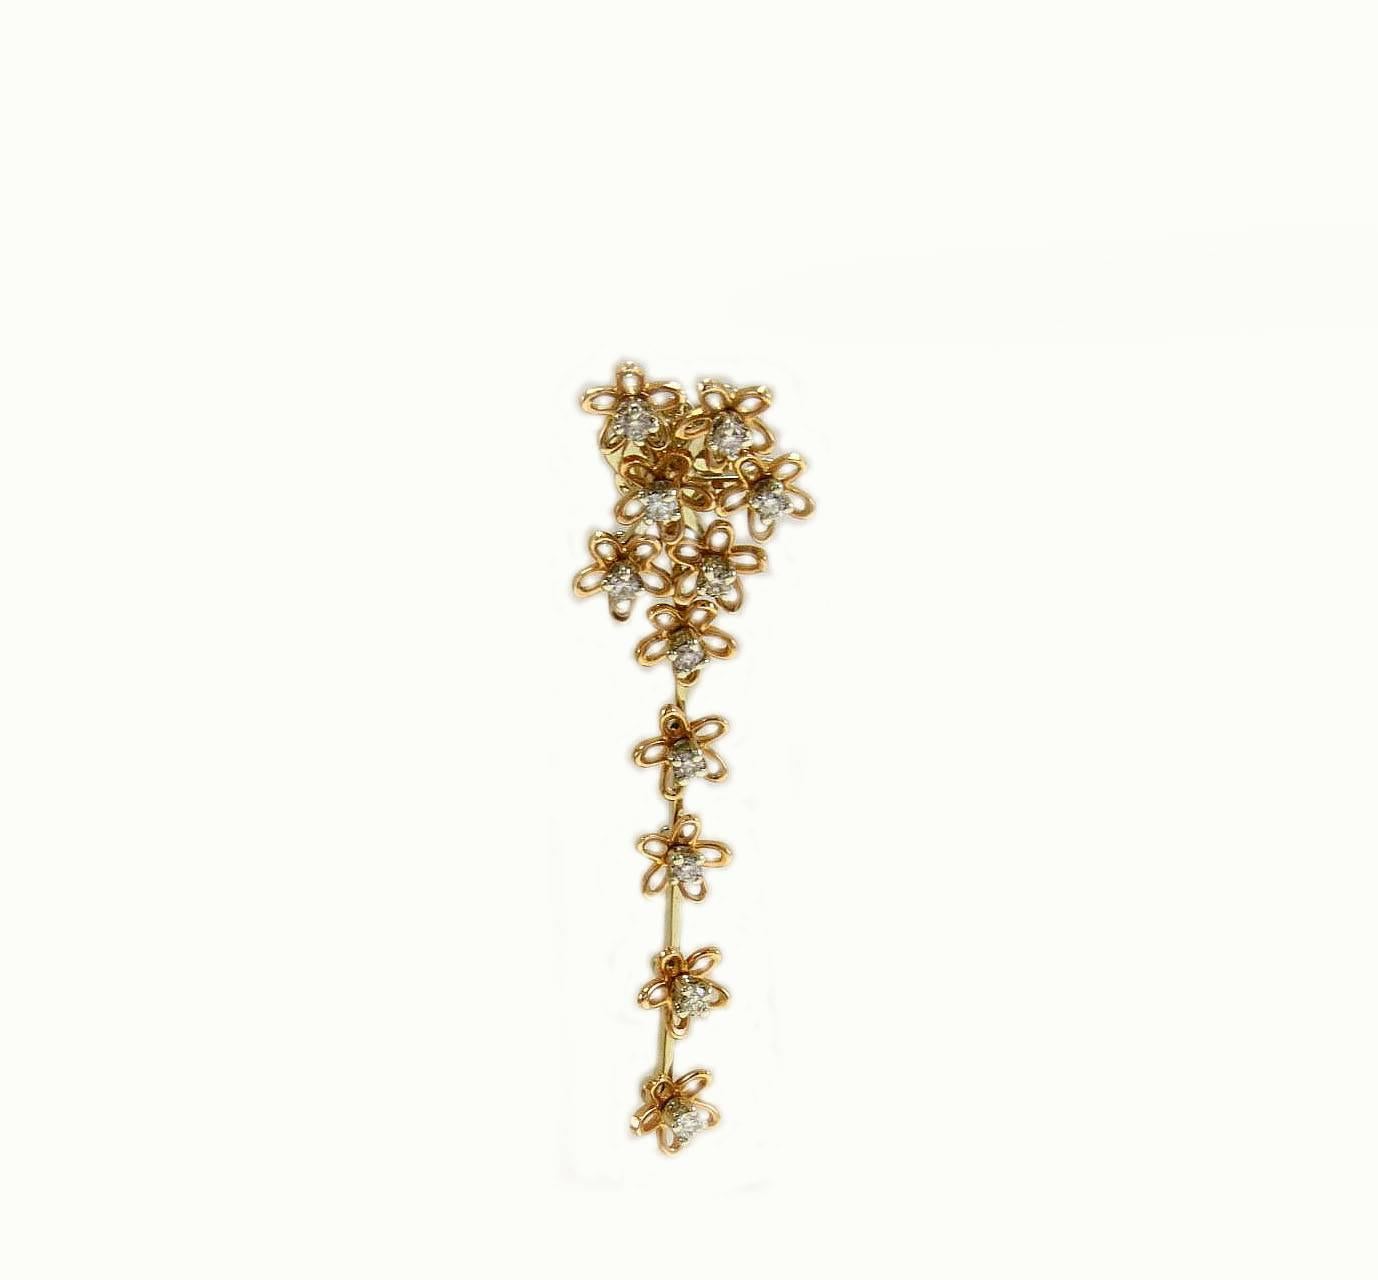 Elegant earrings in 18Kt gold  composed of a rope of daisies with a diamond in the center.

diamonds(0.41Kt)
top weigth 7.4gr
Rf.127468